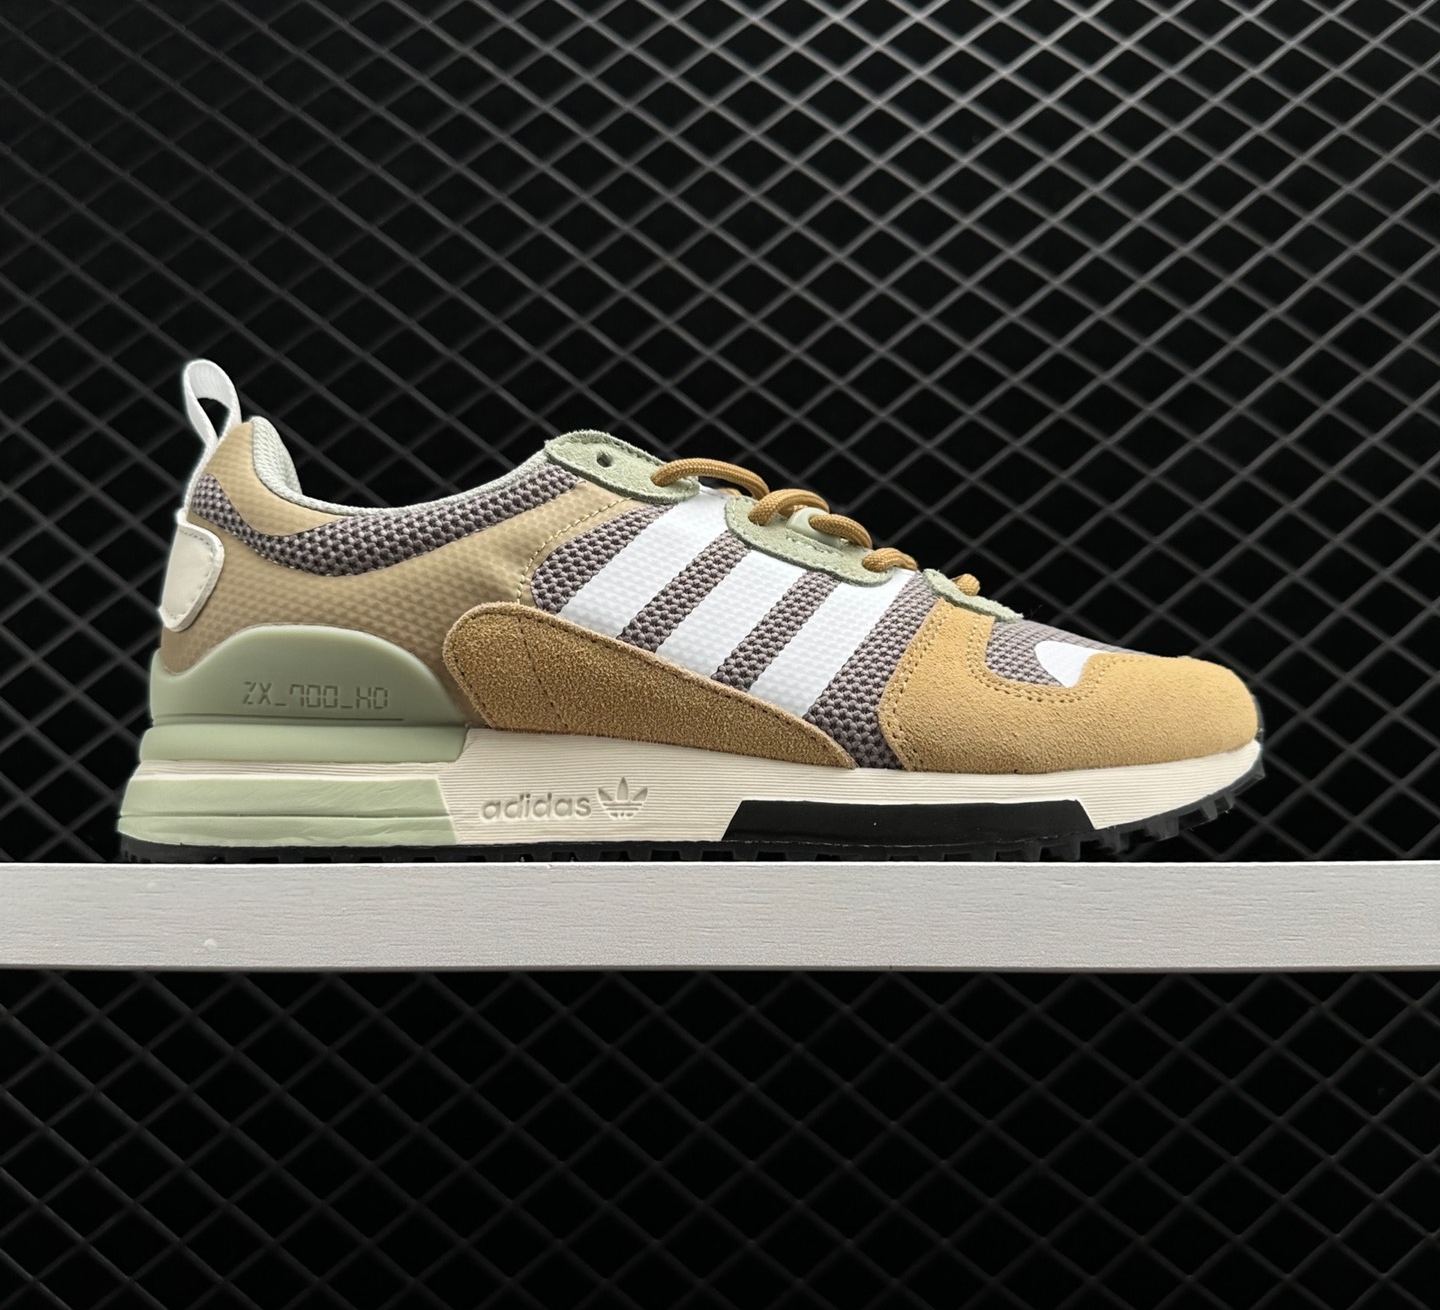 Adidas Originals ZX 700 HD Shoes in Beige/Off White/Feather Grey | H01849